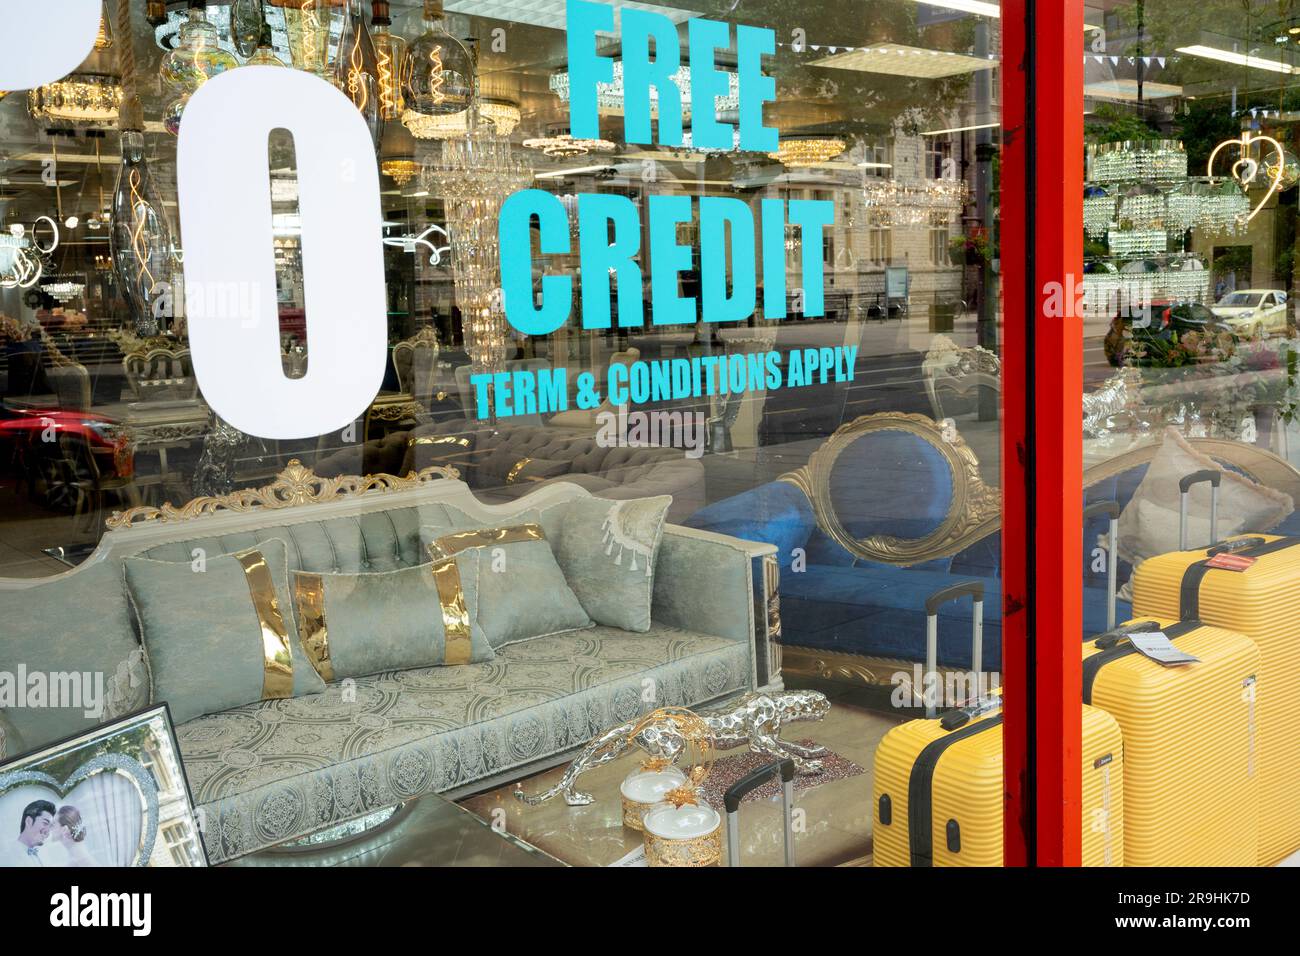 A furniture and home fixtures business advertises interest free credit in ts window in Ealing, on 26th June, in London, England. Stock Photo